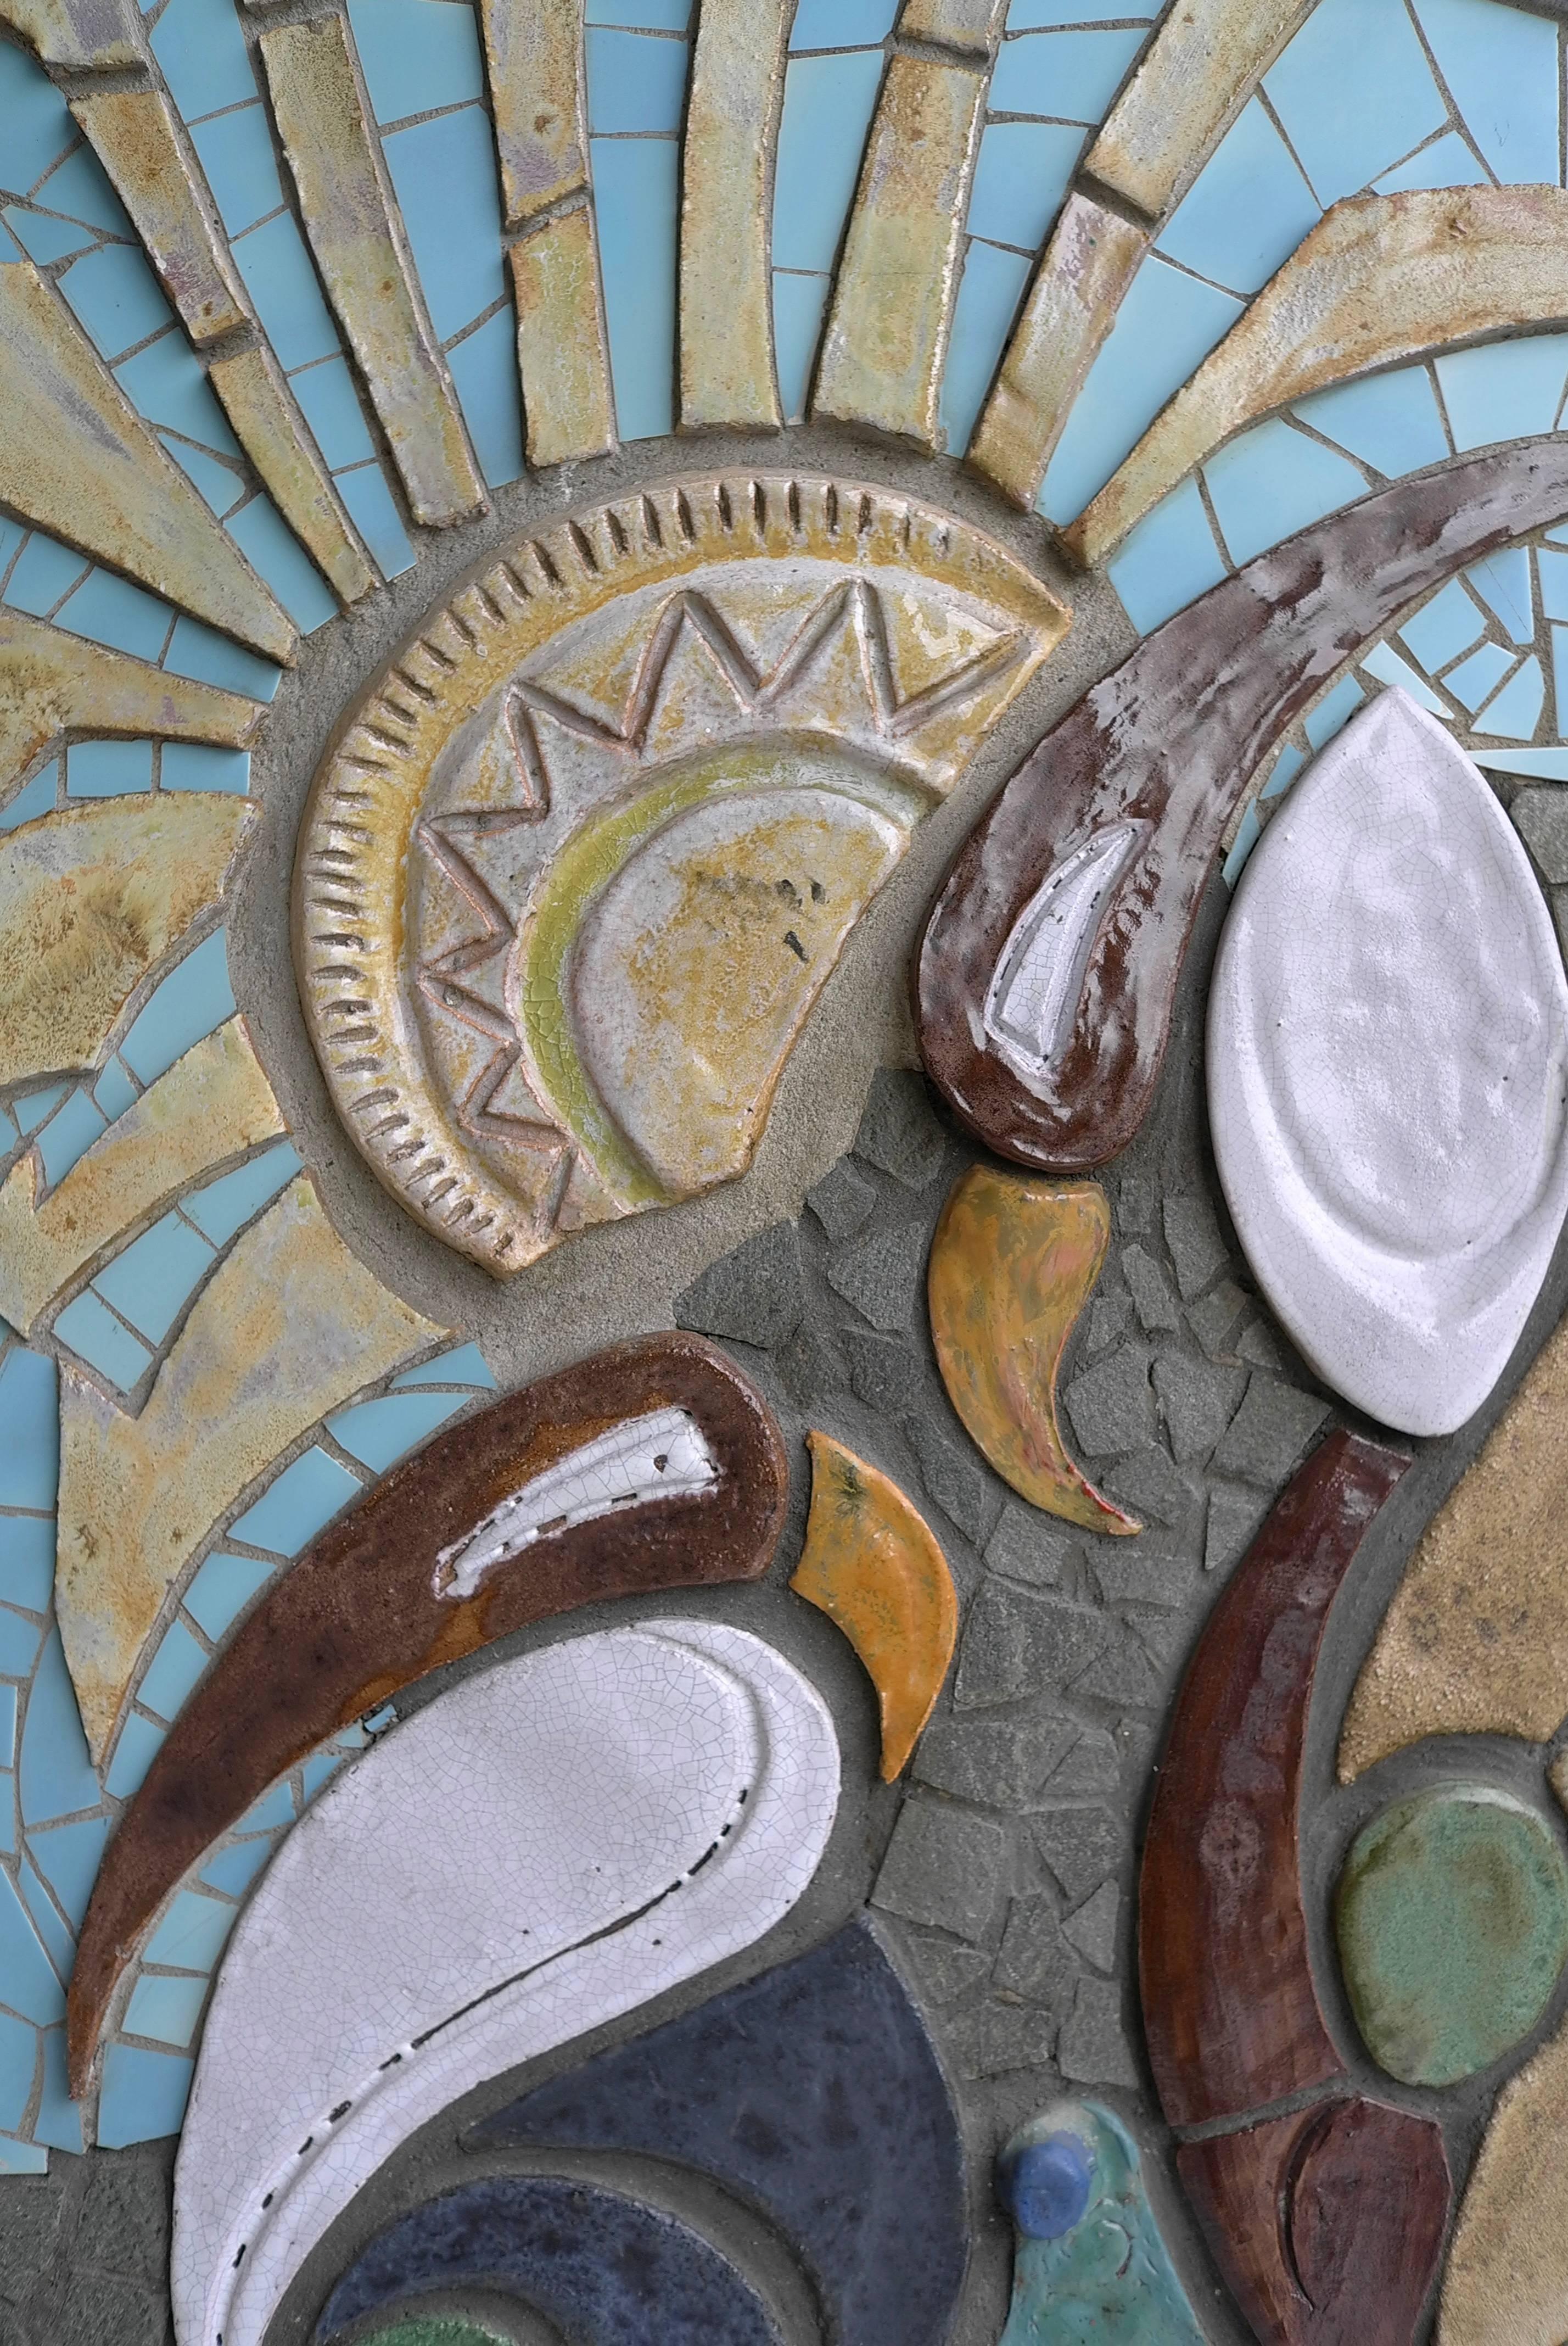 Large ceramic wall sculpture with exotic bird and Sun image.

This wall sculpture was inserted into a wall from a 1960s villa.
It is handmade by an unknown artist. Techniques: Glazed ceramic in combination with tiles on hardboard. It can be